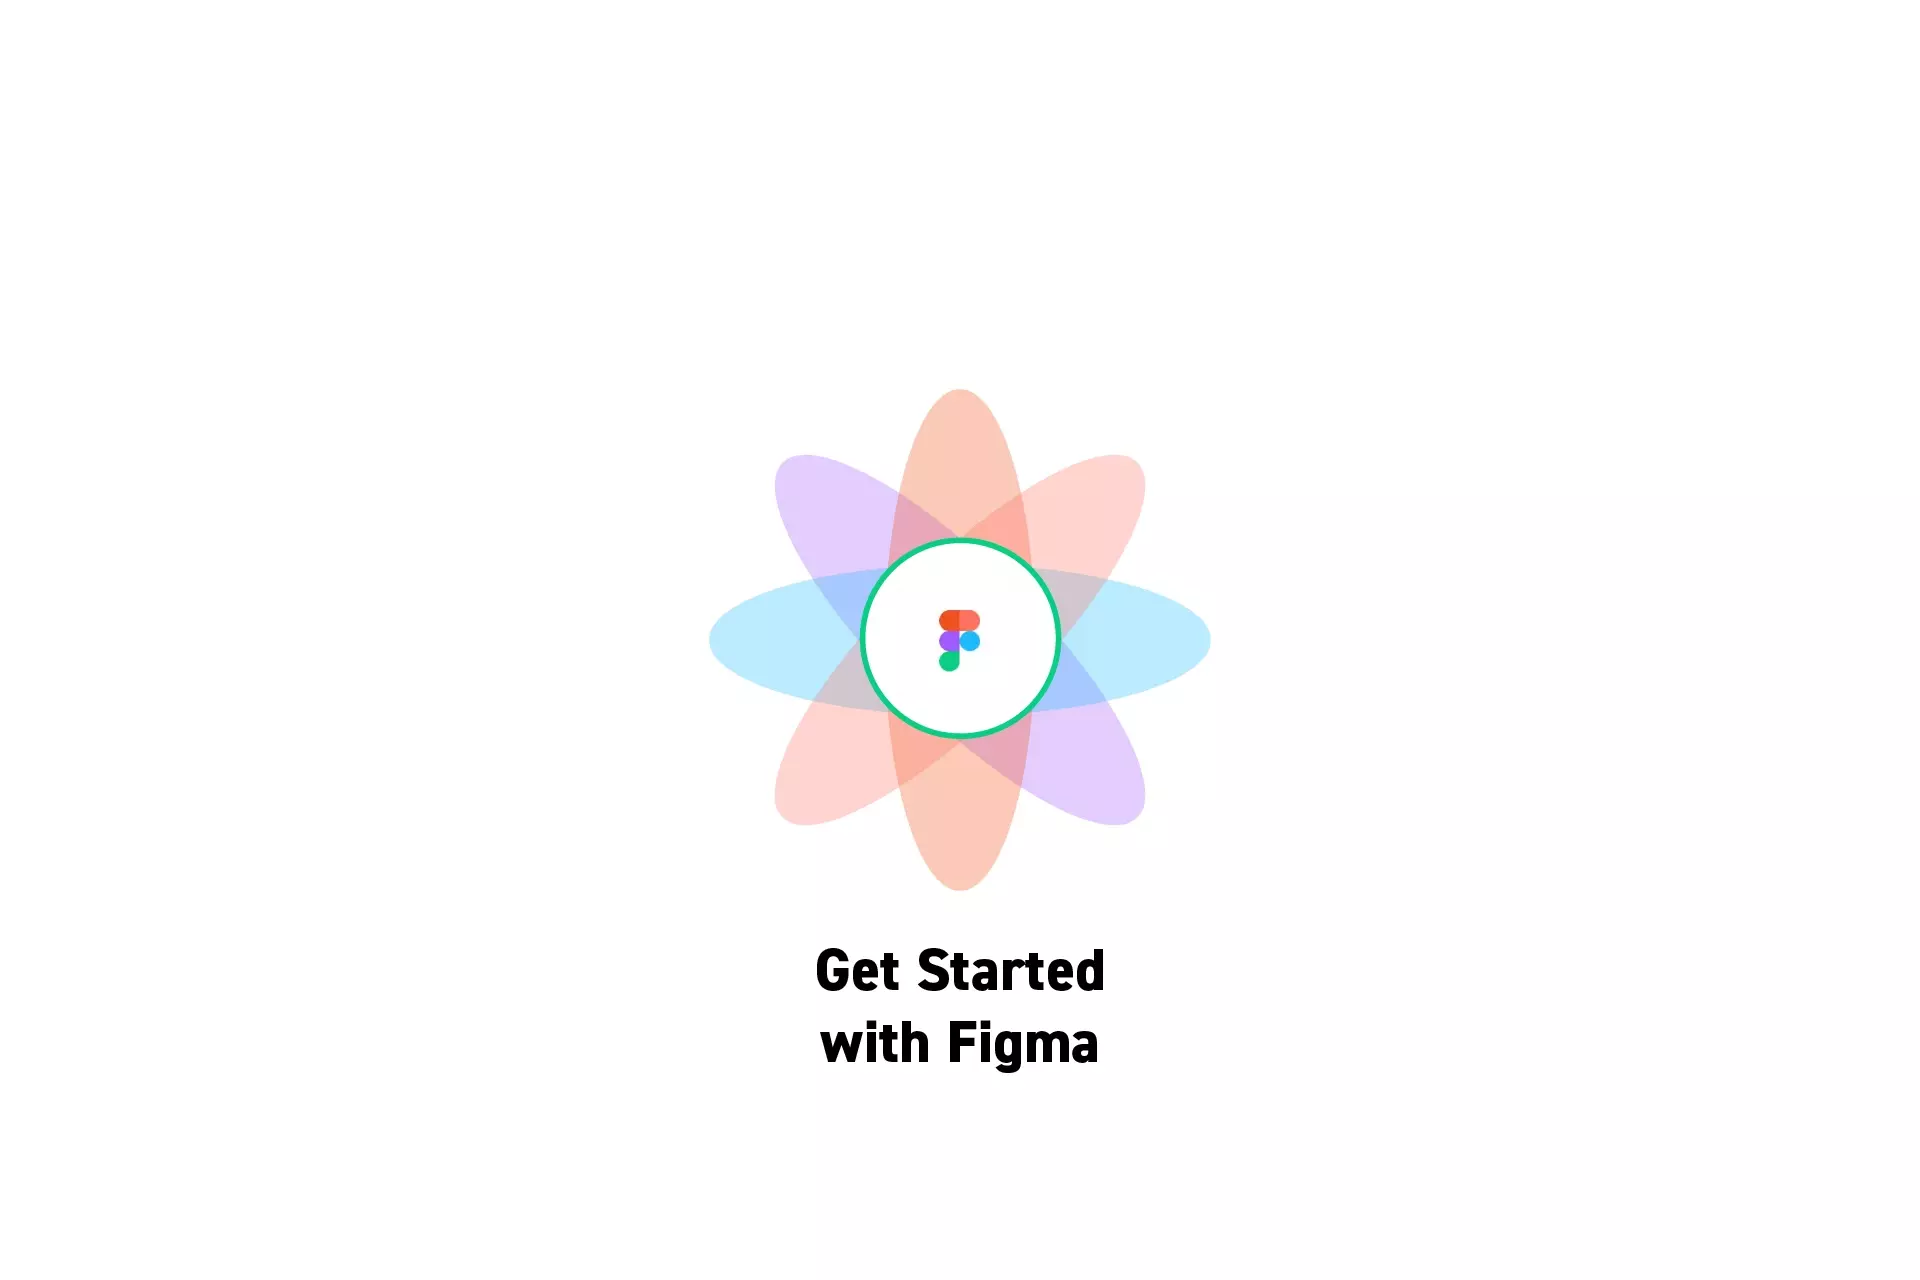 A flower that represents Figma with the text "Get Started with Figma" beneath it.